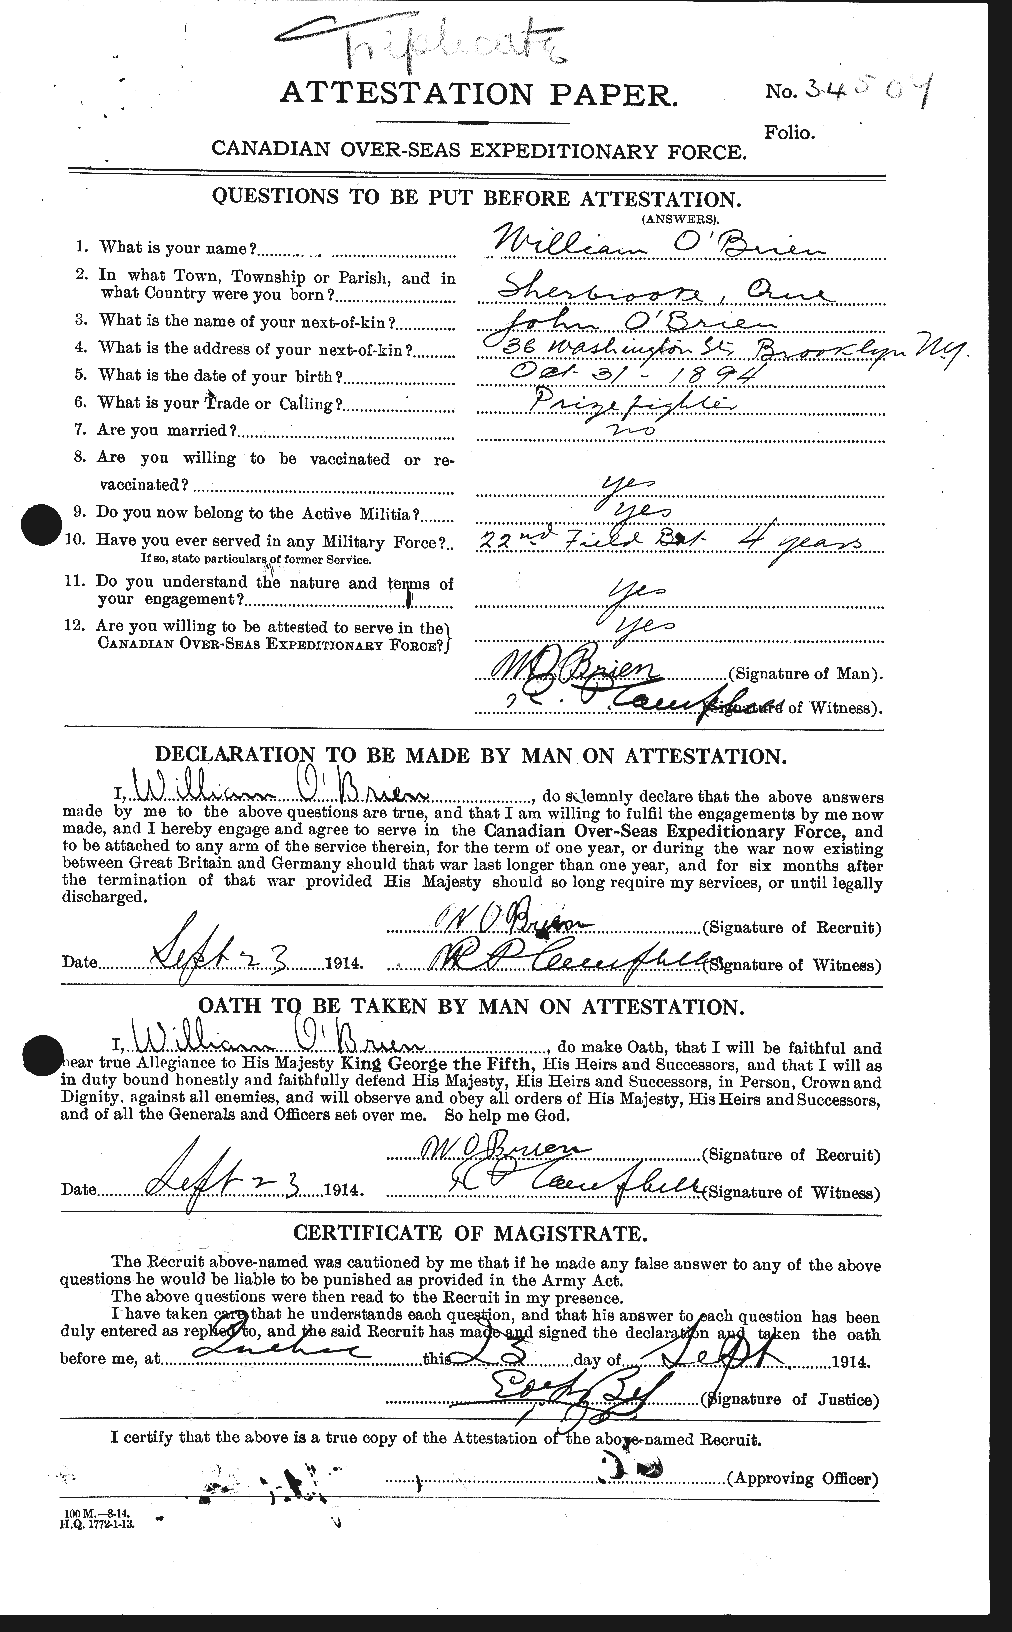 Personnel Records of the First World War - CEF 555016a